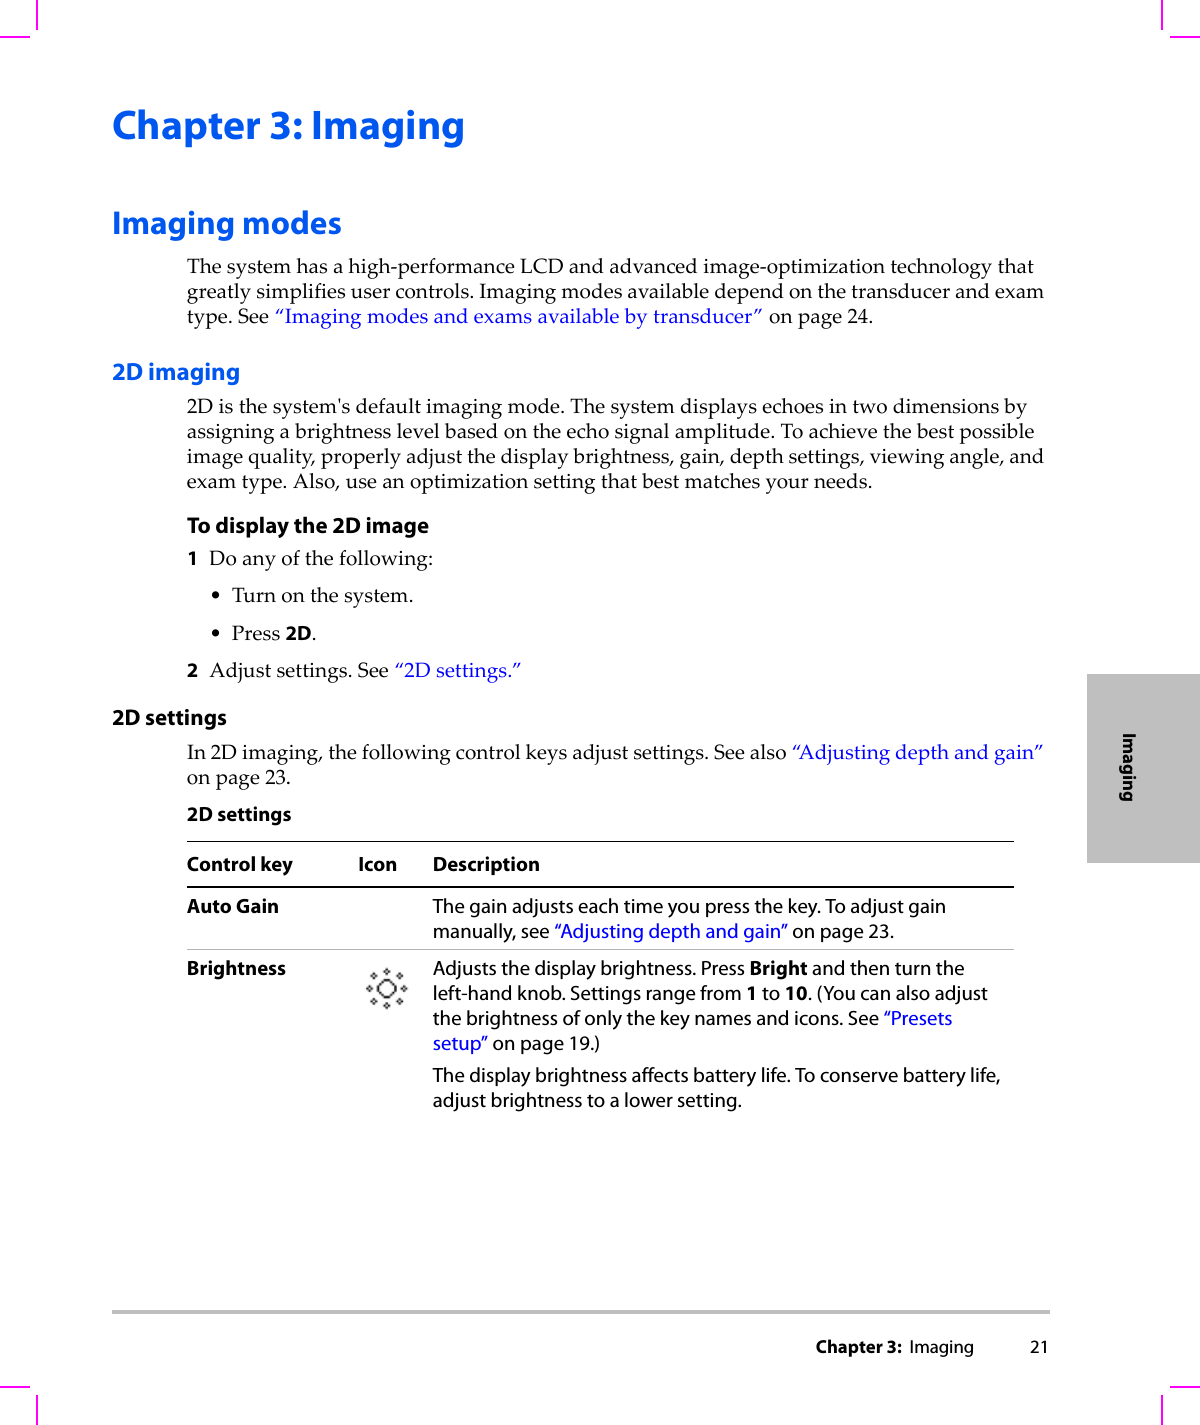 Chapter 3:  Imaging 21ImagingChapter 3: ImagingImaging modesThesystemhasahigh‐performanceLCDandadvancedimage‐optimizationtechnologythatgreatlysimplifiesusercontrols.Imagingmodesavailabledependonthetransducerandexamtype.See“Imagingmodesandexamsavailablebytransducer”onpage 24.2D imaging2Disthesystemʹsdefaultimagingmode.Thesystemdisplaysechoesintwodimensionsbyassigningabrightnesslevelbasedontheechosignalamplitude.Toachievethebestpossibleimagequality,properlyadjustthedisplaybrightness,gain,depthsettings,viewingangle,andexamtype.Also,useanoptimizationsettingthatbestmatchesyourneeds.To display the 2D image1Doanyofthefollowing:•Turnonthesystem.•Press2D.2Adjustsettings.See“2Dsettings.”2D settingsIn2Dimaging,thefollowingcontrolkeysadjustsettings.Seealso“A d j u s t i n g depthandgain”onpage 23.2D settingsControl key Icon DescriptionAuto Gain The gain adjusts each time you press the key. To adjust gain manually, see “Adjusting depth and gain” on page 23.Brightness Adjusts the display brightness. Press Bright and then turn the left-hand knob. Settings range from 1 to 10. (You can also adjust the brightness of only the key names and icons. See “Presets setup” on page 19.) The display brightness affects battery life. To conserve battery life, adjust brightness to a lower setting.